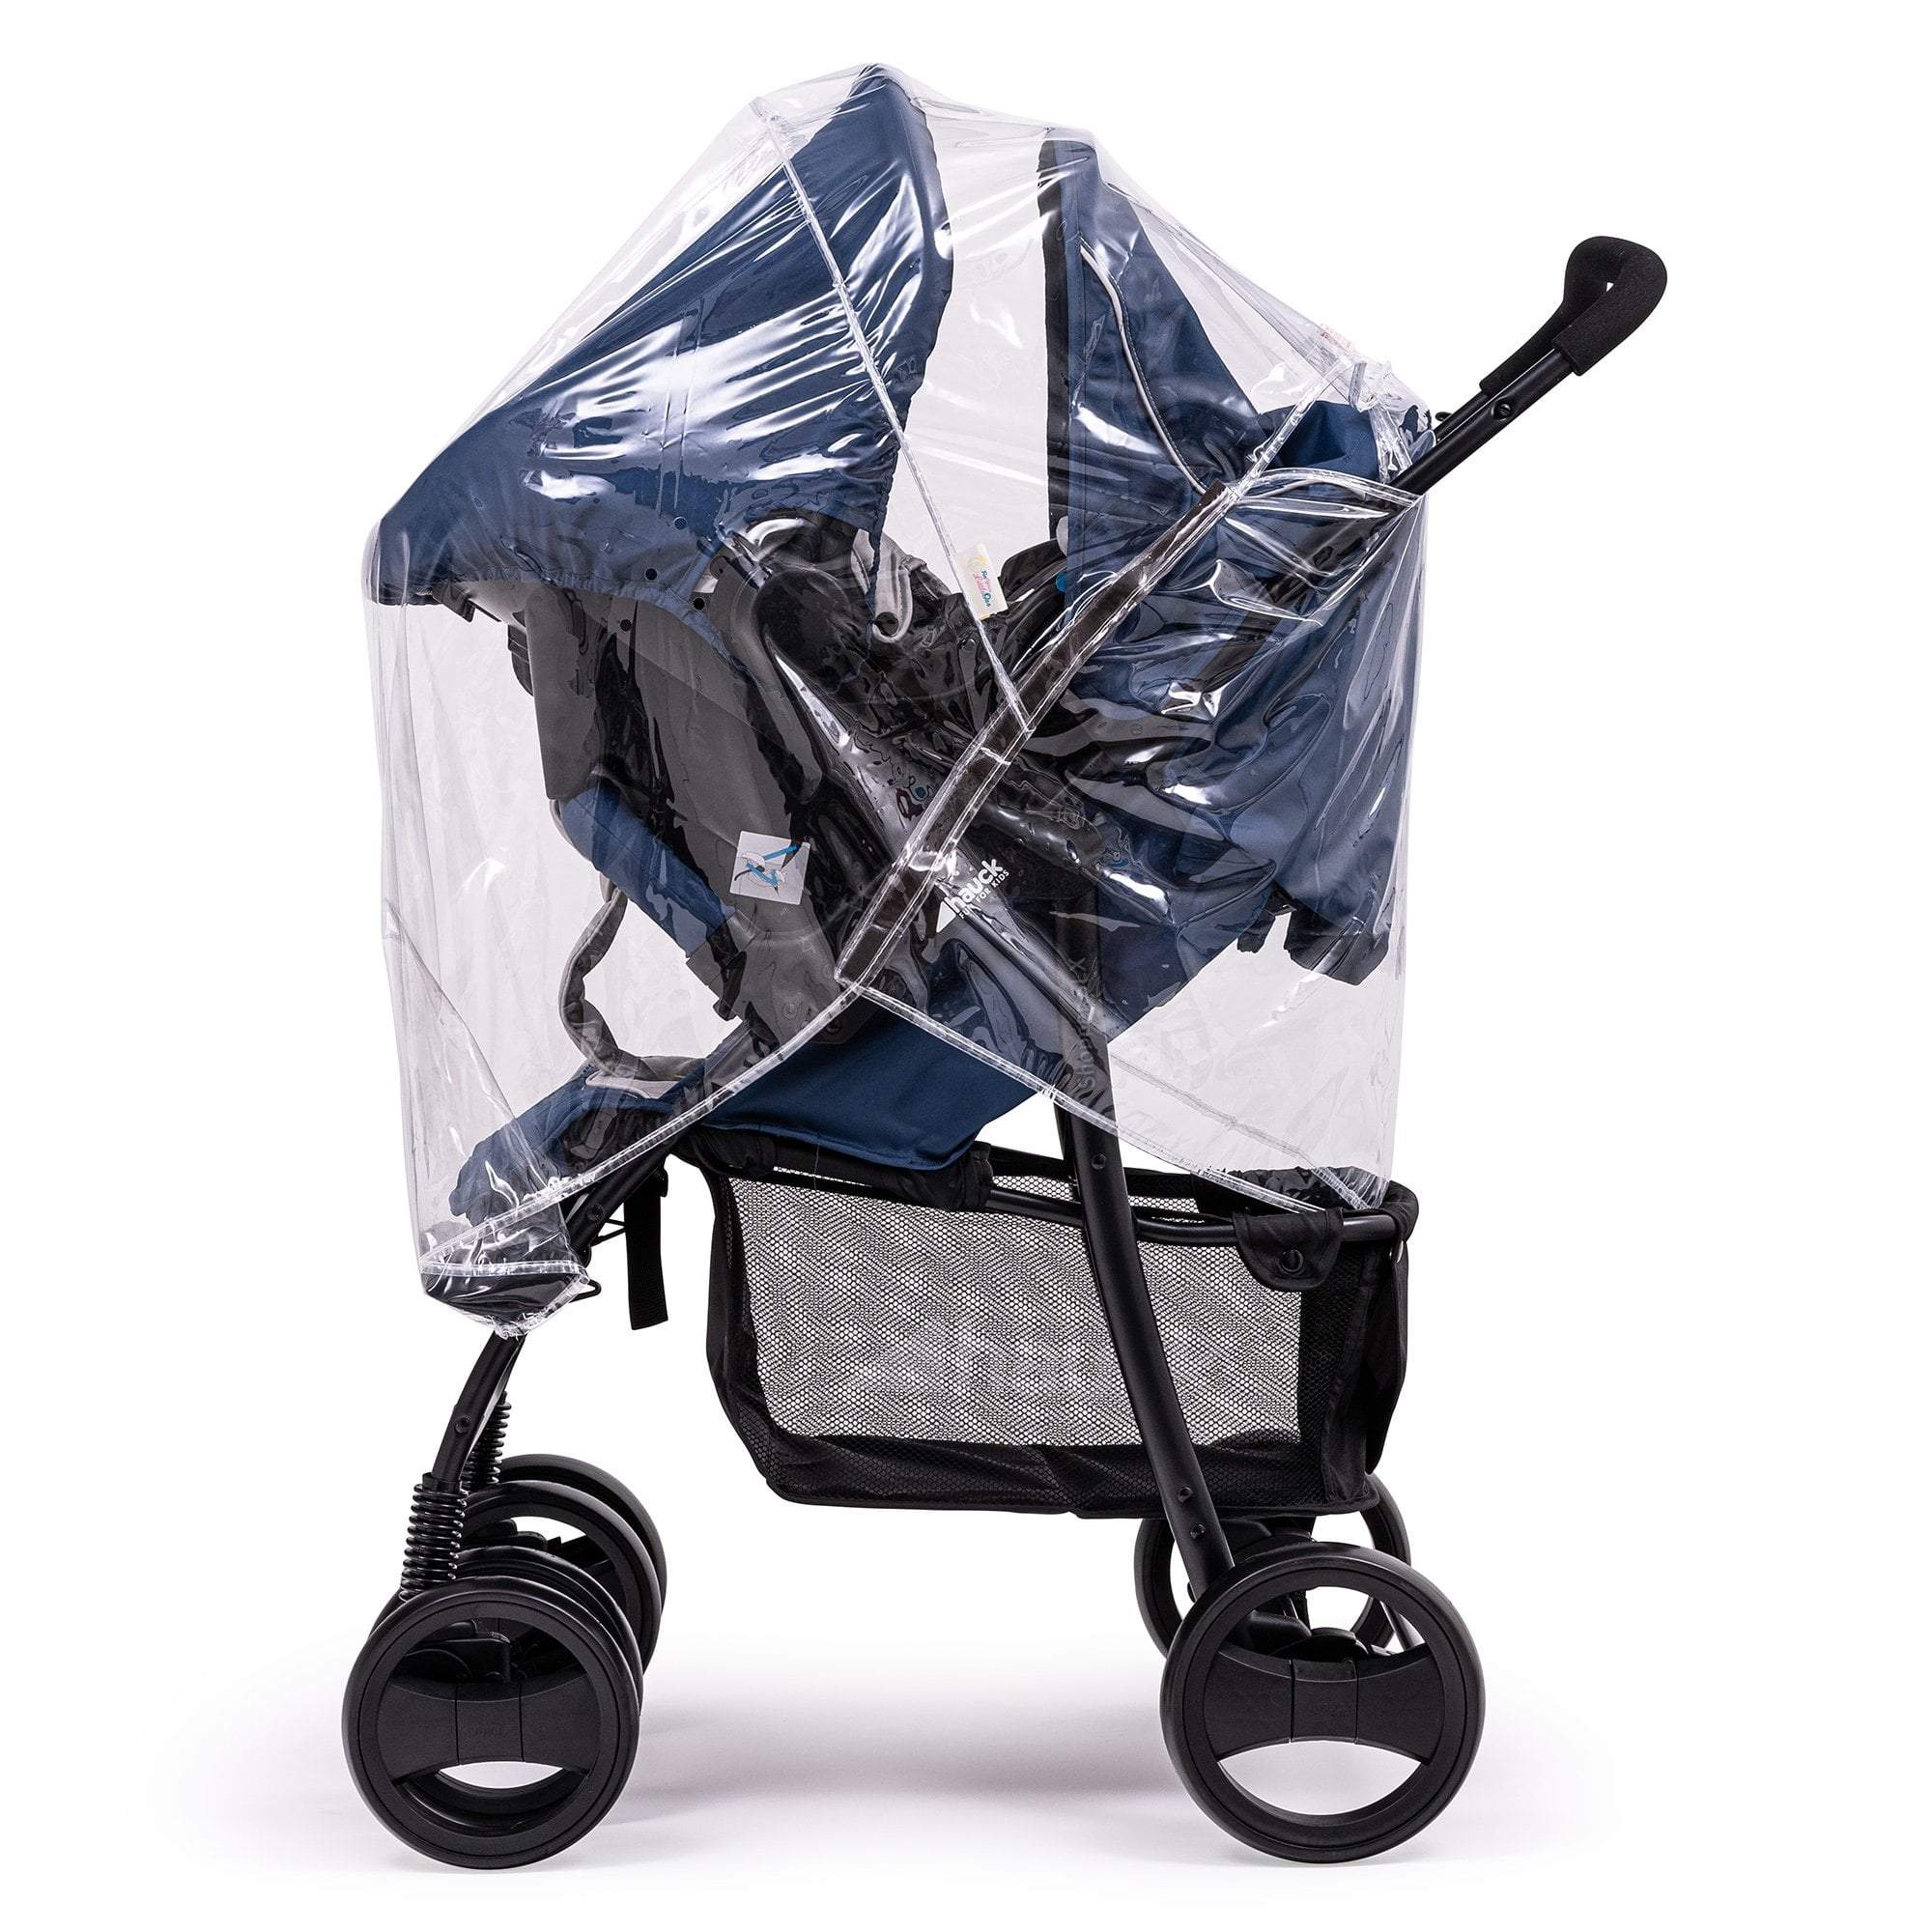 Travel System Raincover Compatible with Noukies - Fits All Models - For Your Little One